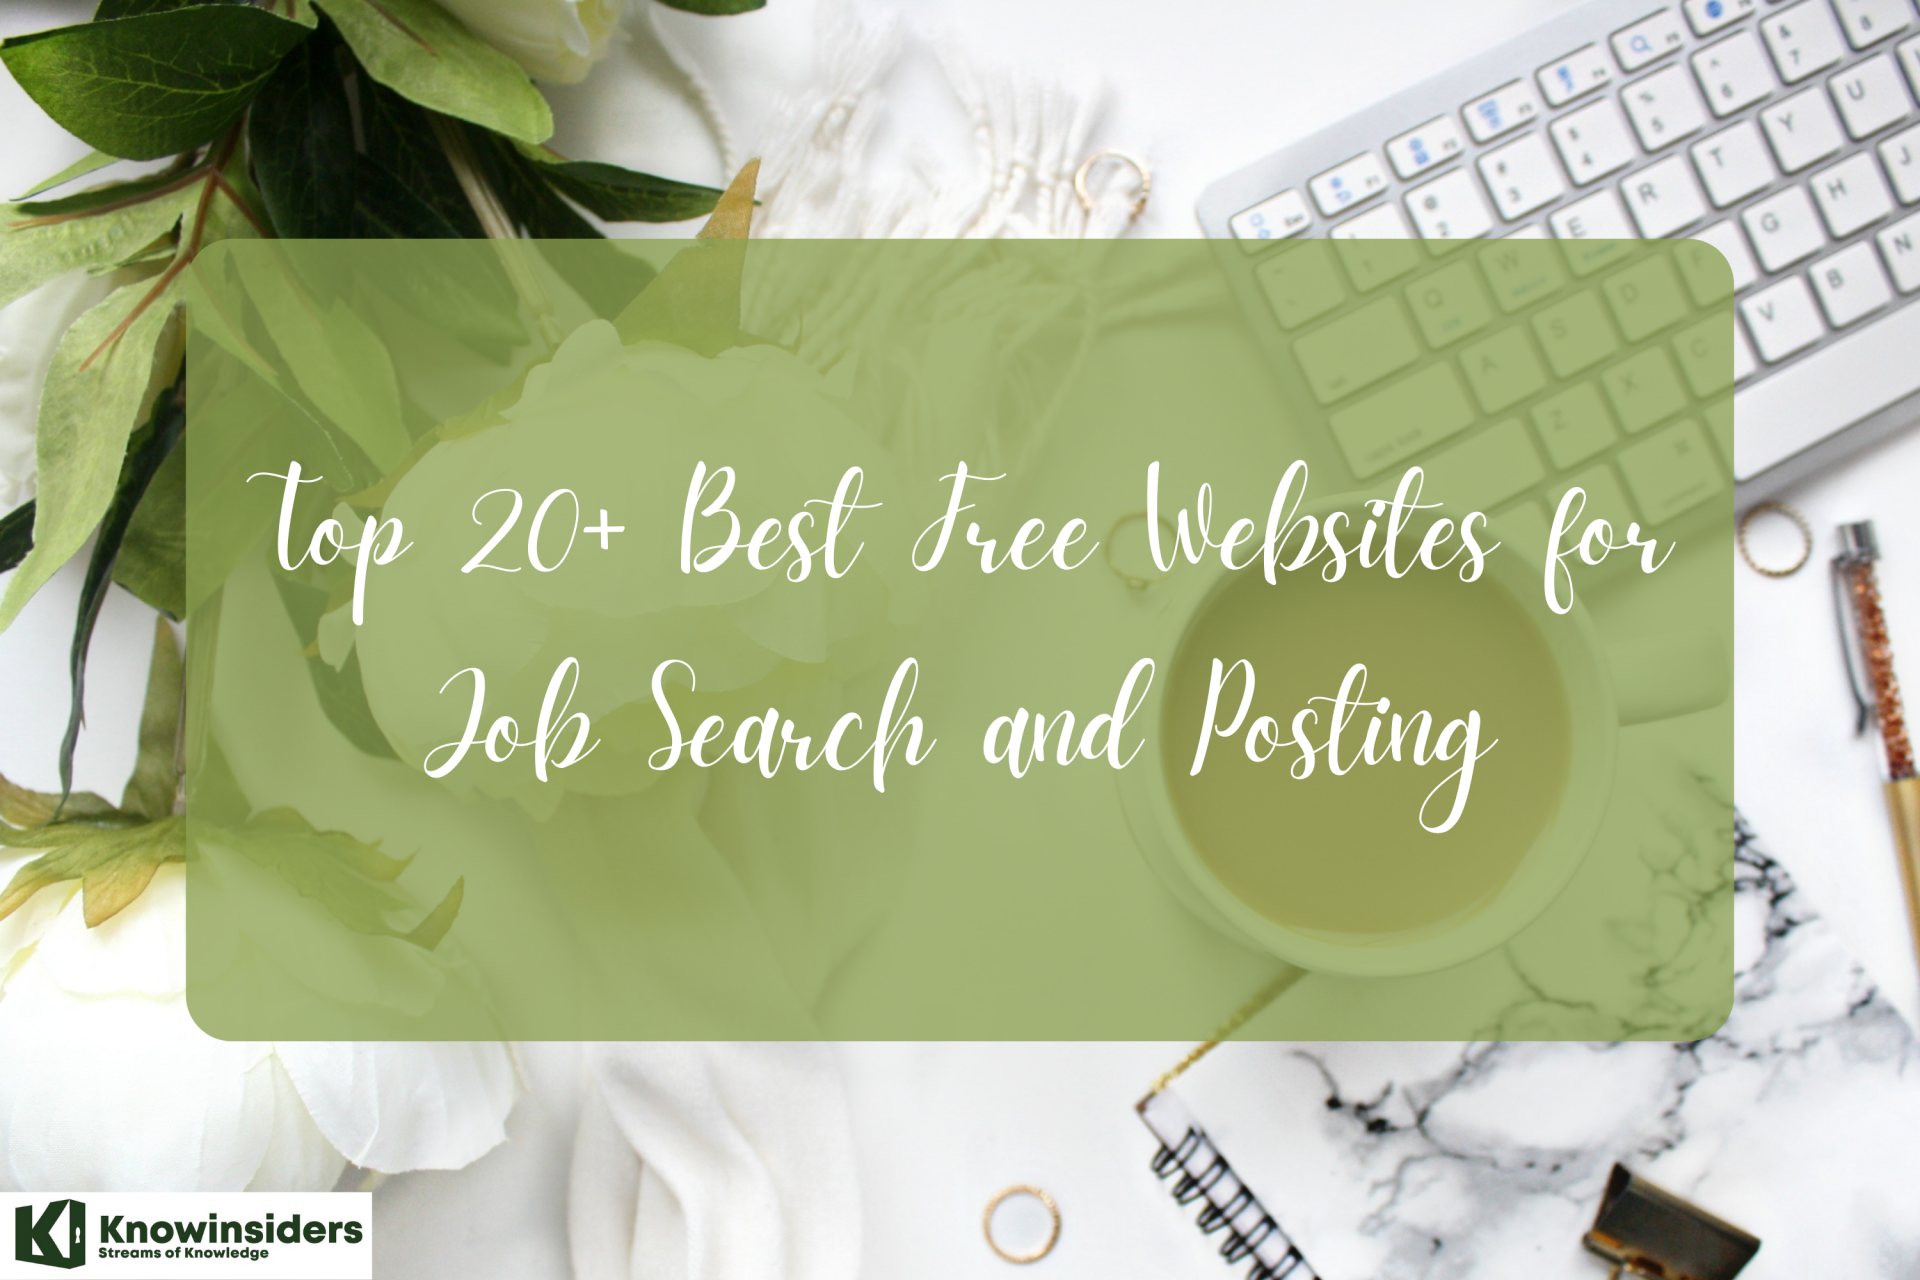 Top 20+ Best Free Sites for Job Search and Posting